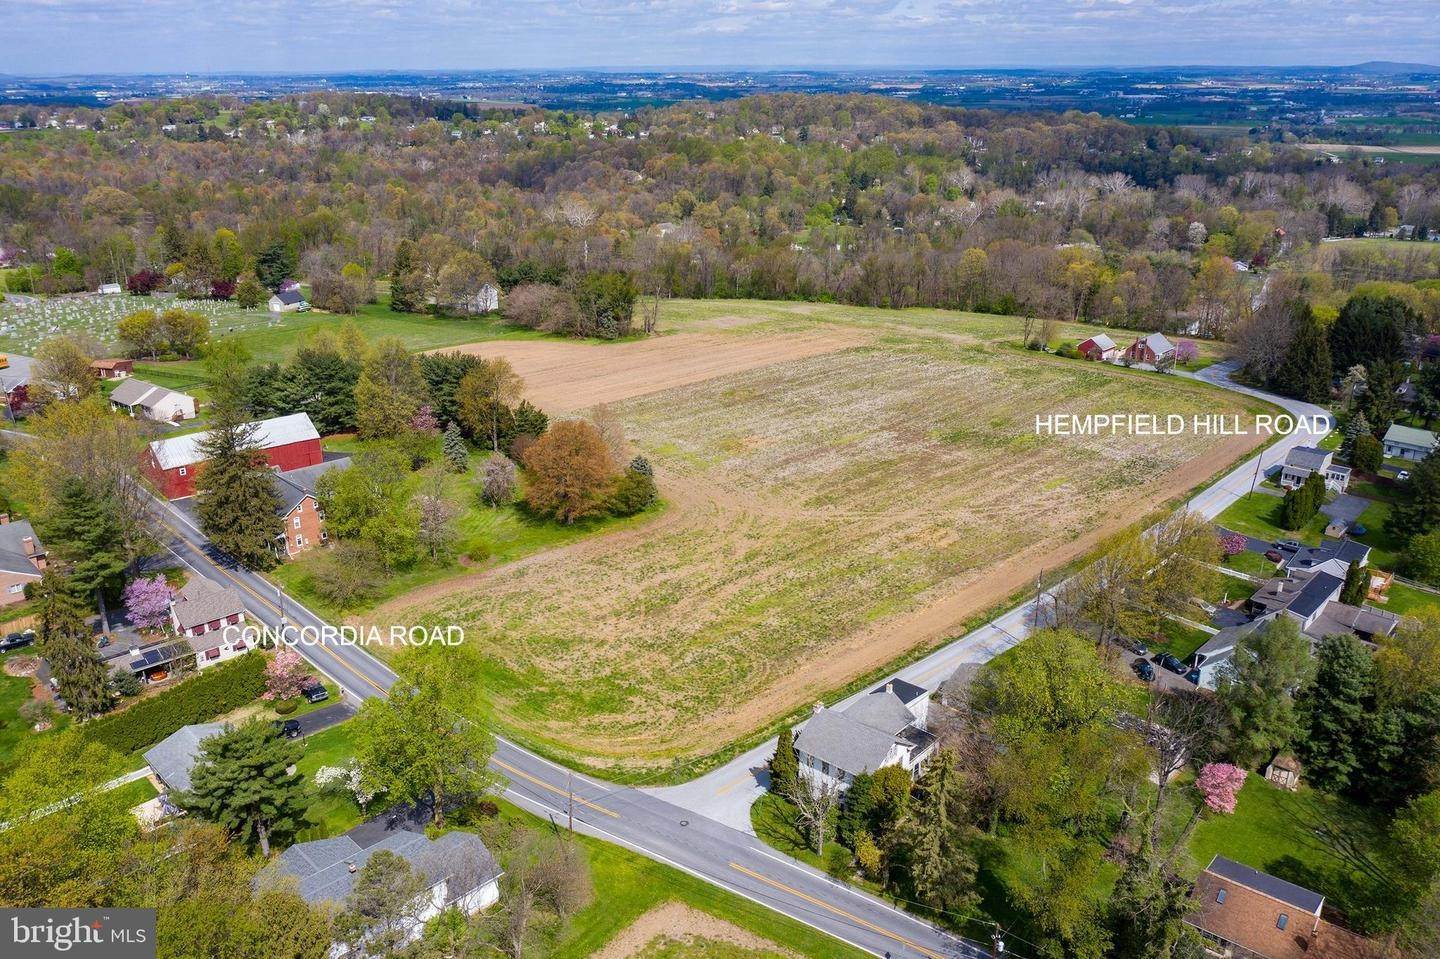 12. Land for Sale at 419-LOT # 7 HEMPFIELD HILL RD #LOT # 7 Columbia, Pennsylvania 17512 United States